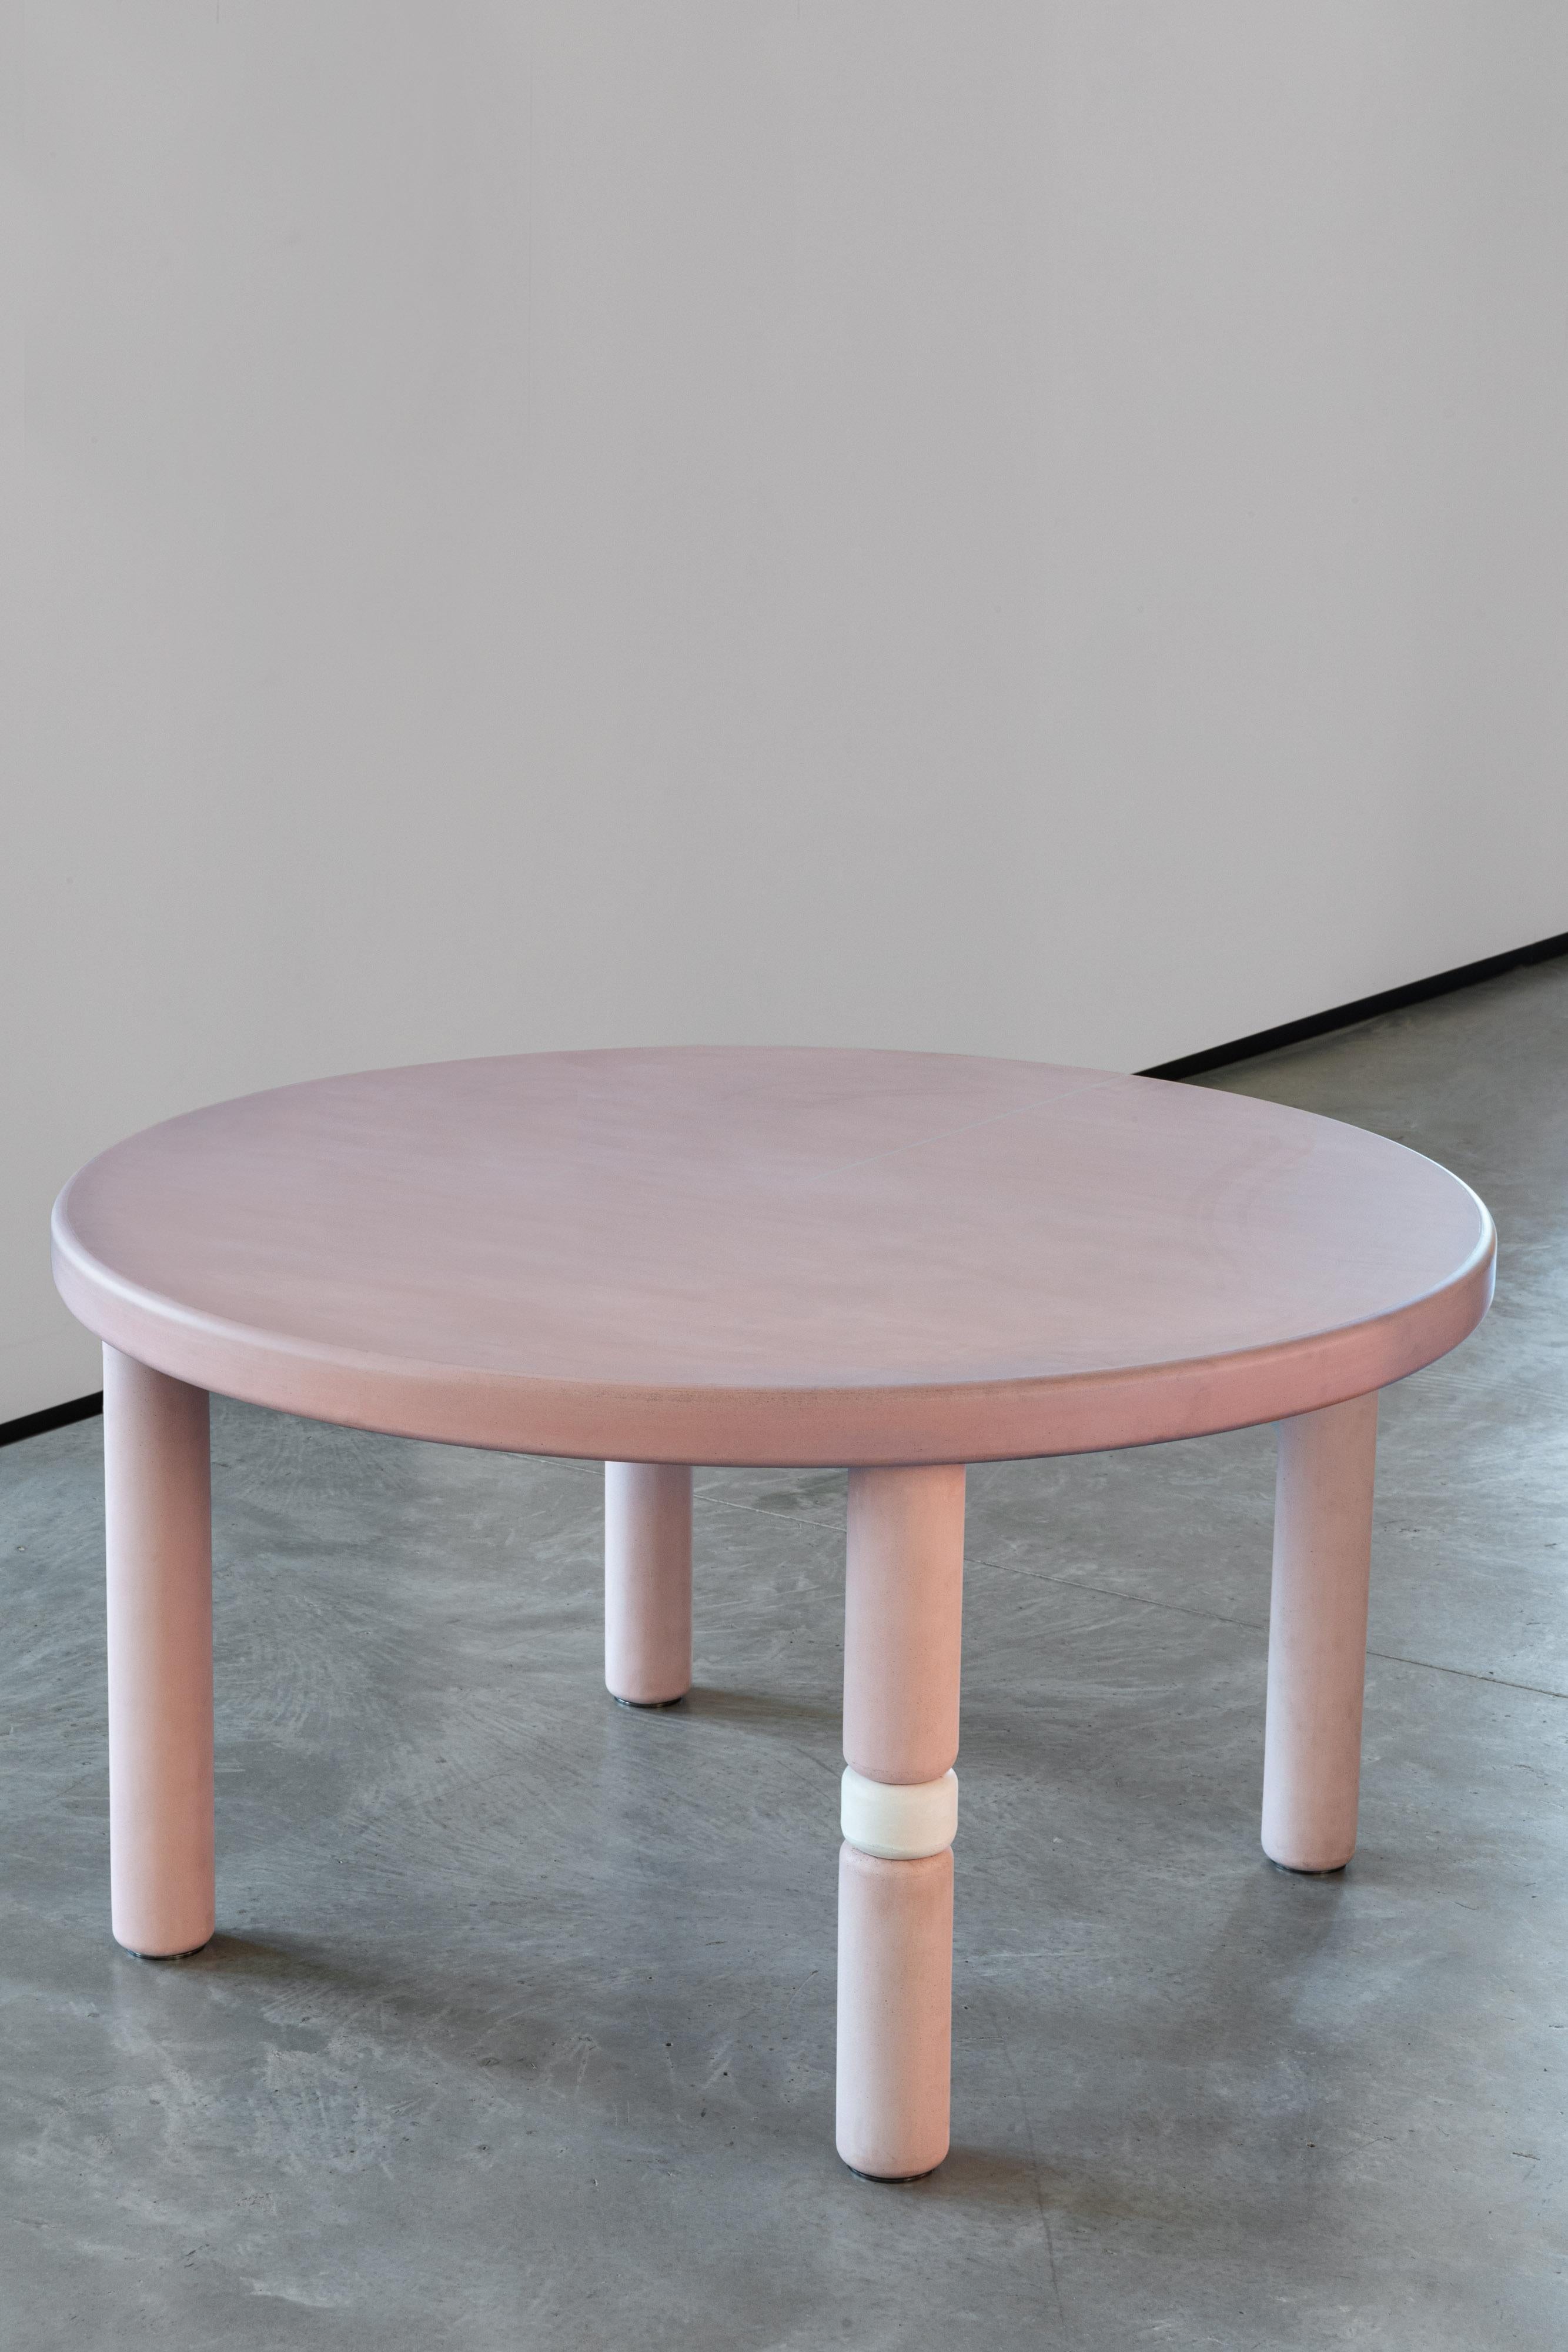 The Flipper Circular Table is part of the Flipper collection designed by Marialaura Irvine. Play, color and freedom are the keywords of this new collection based on the principle 